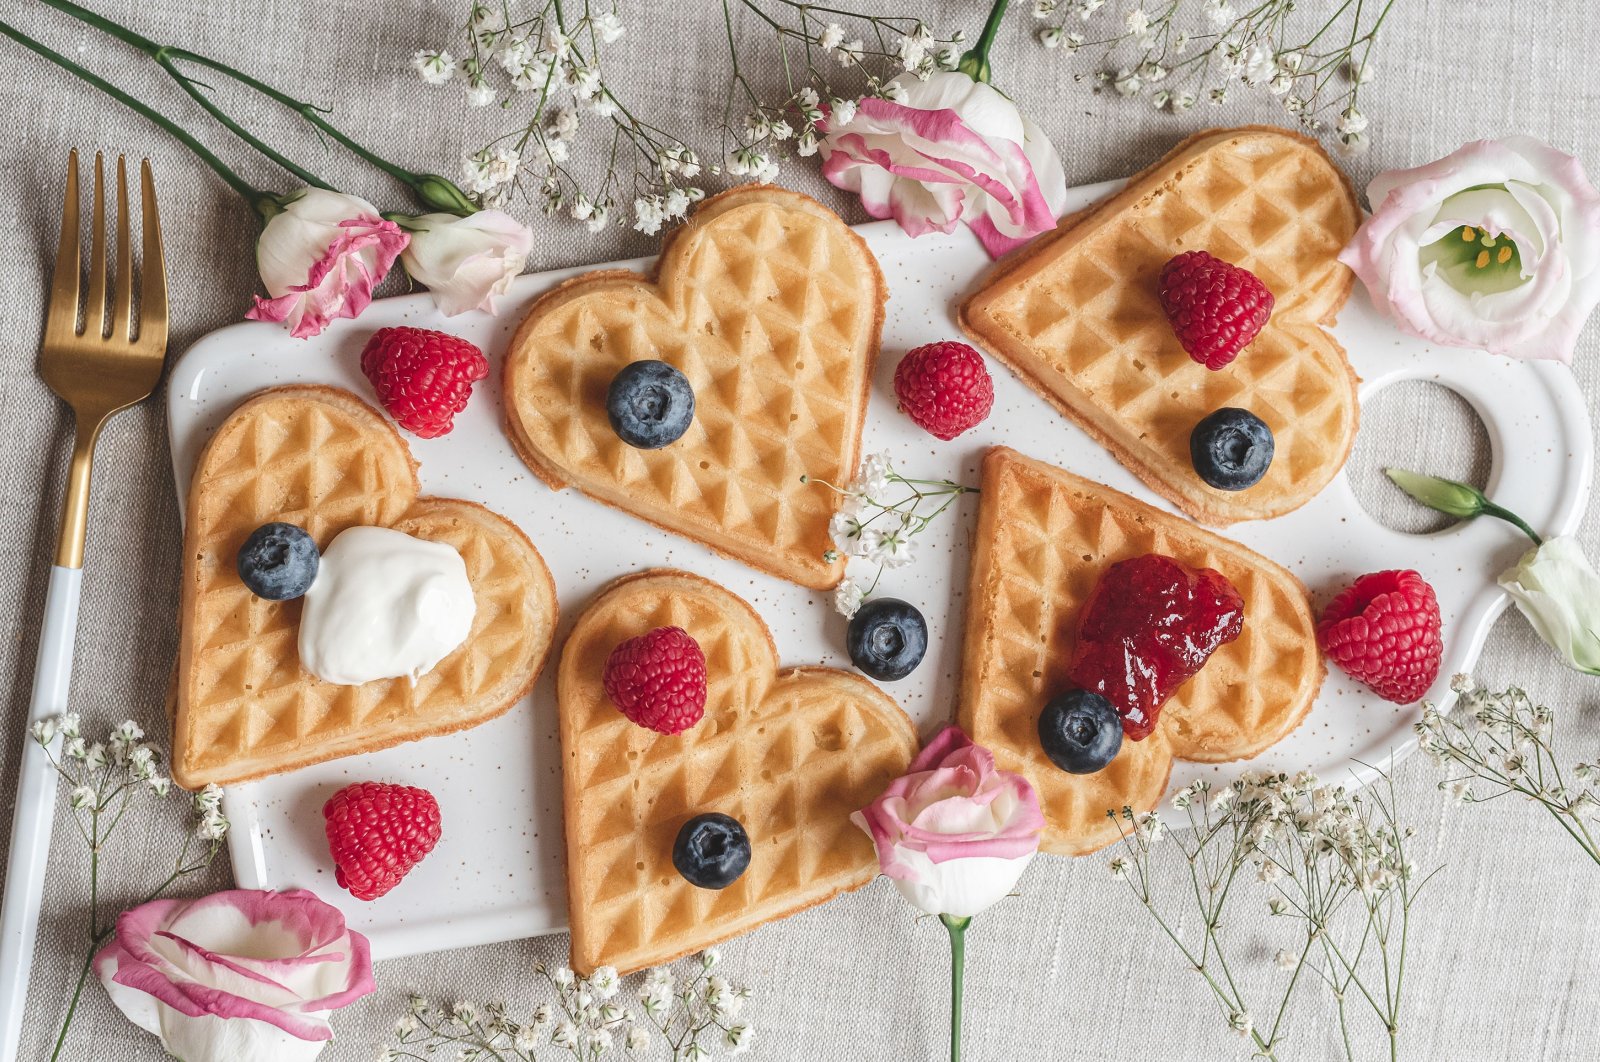 Homemade waffles in the shape of hearts. (Shutterstock Photo)